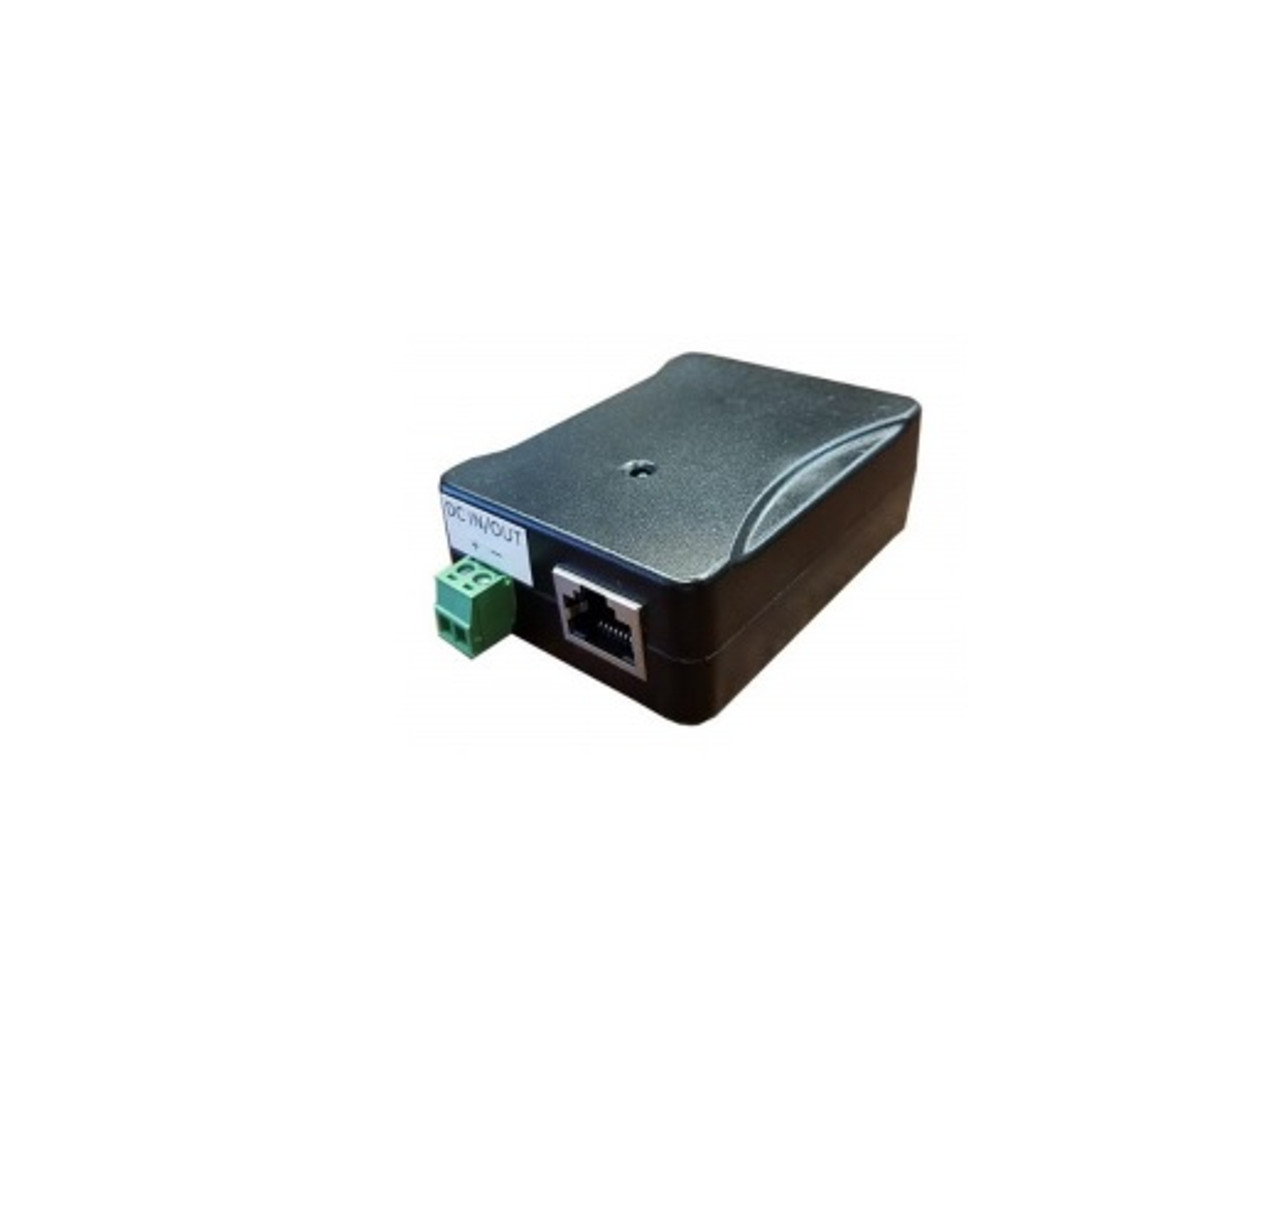 Difference Between PoE Injector and PoE Splitter